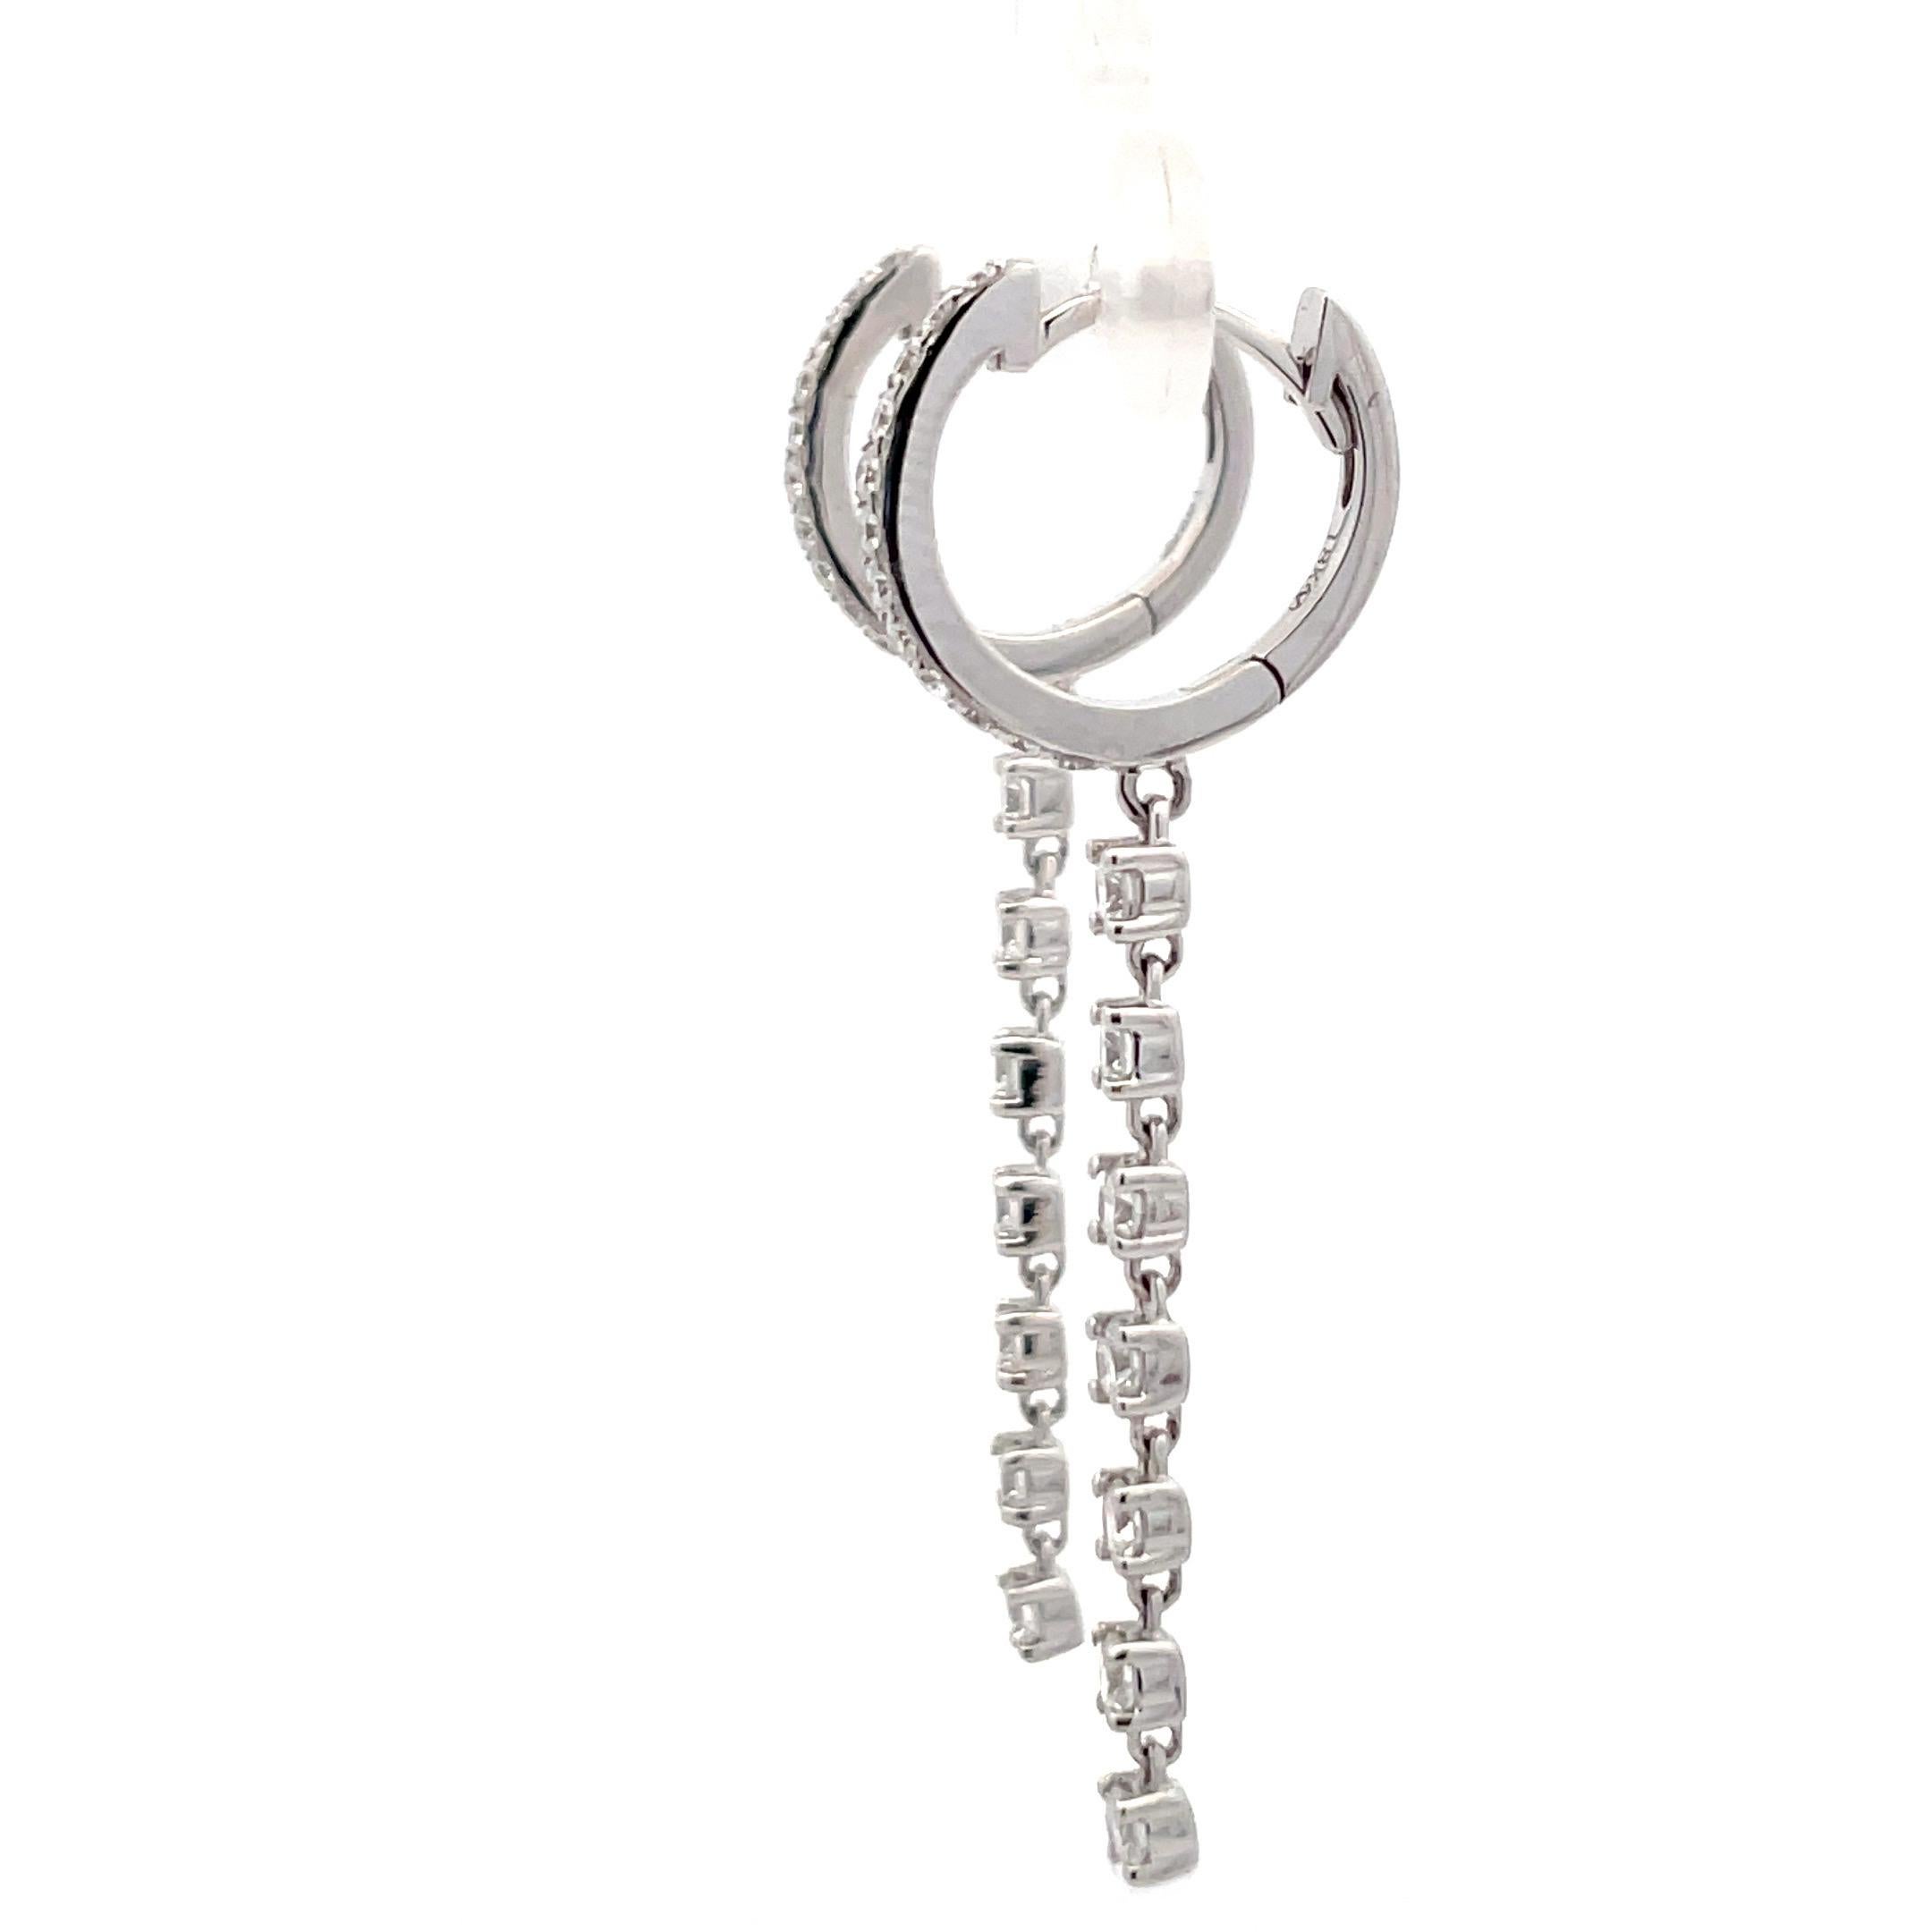 18 Karat White gold drop earrings featuring a hoop motif with 24 round brilliants weighing 0.30 carats with a diamond dangle drop of 14 diamonds, 0.63 carats.